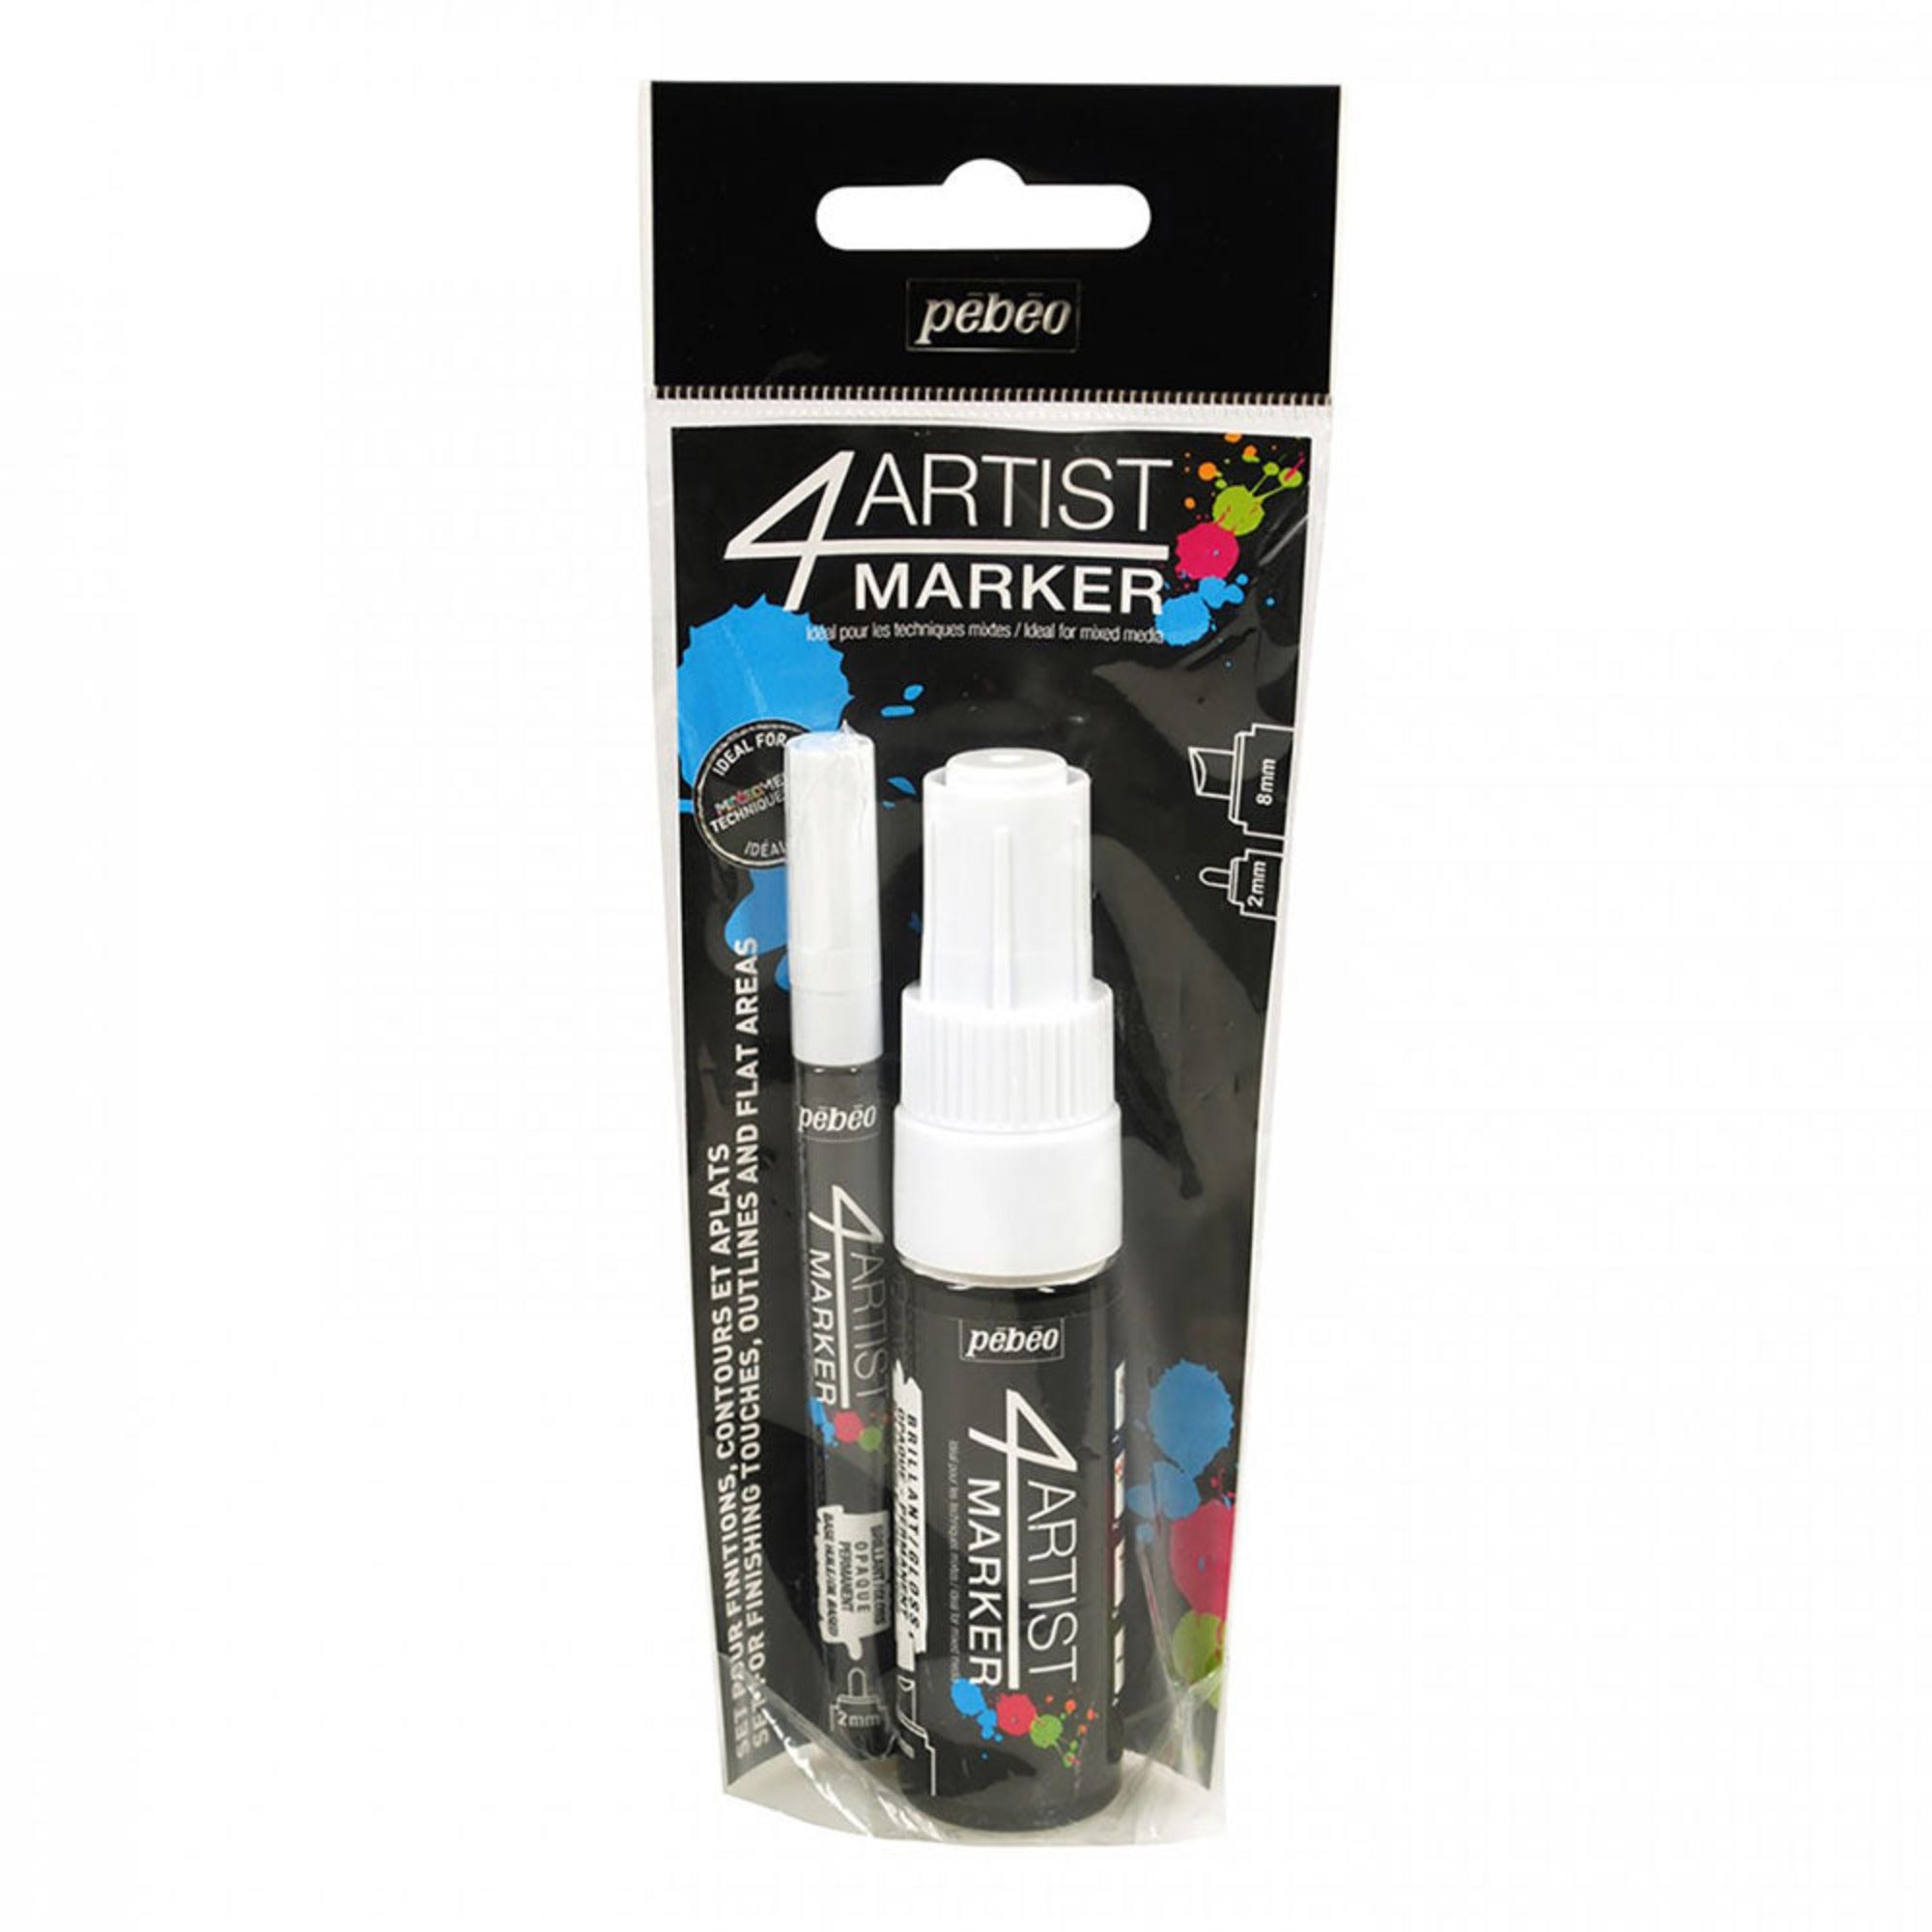 Pebeo 4Artist Set Of 2 WHITE Markers (2mm & 8mm nibs)